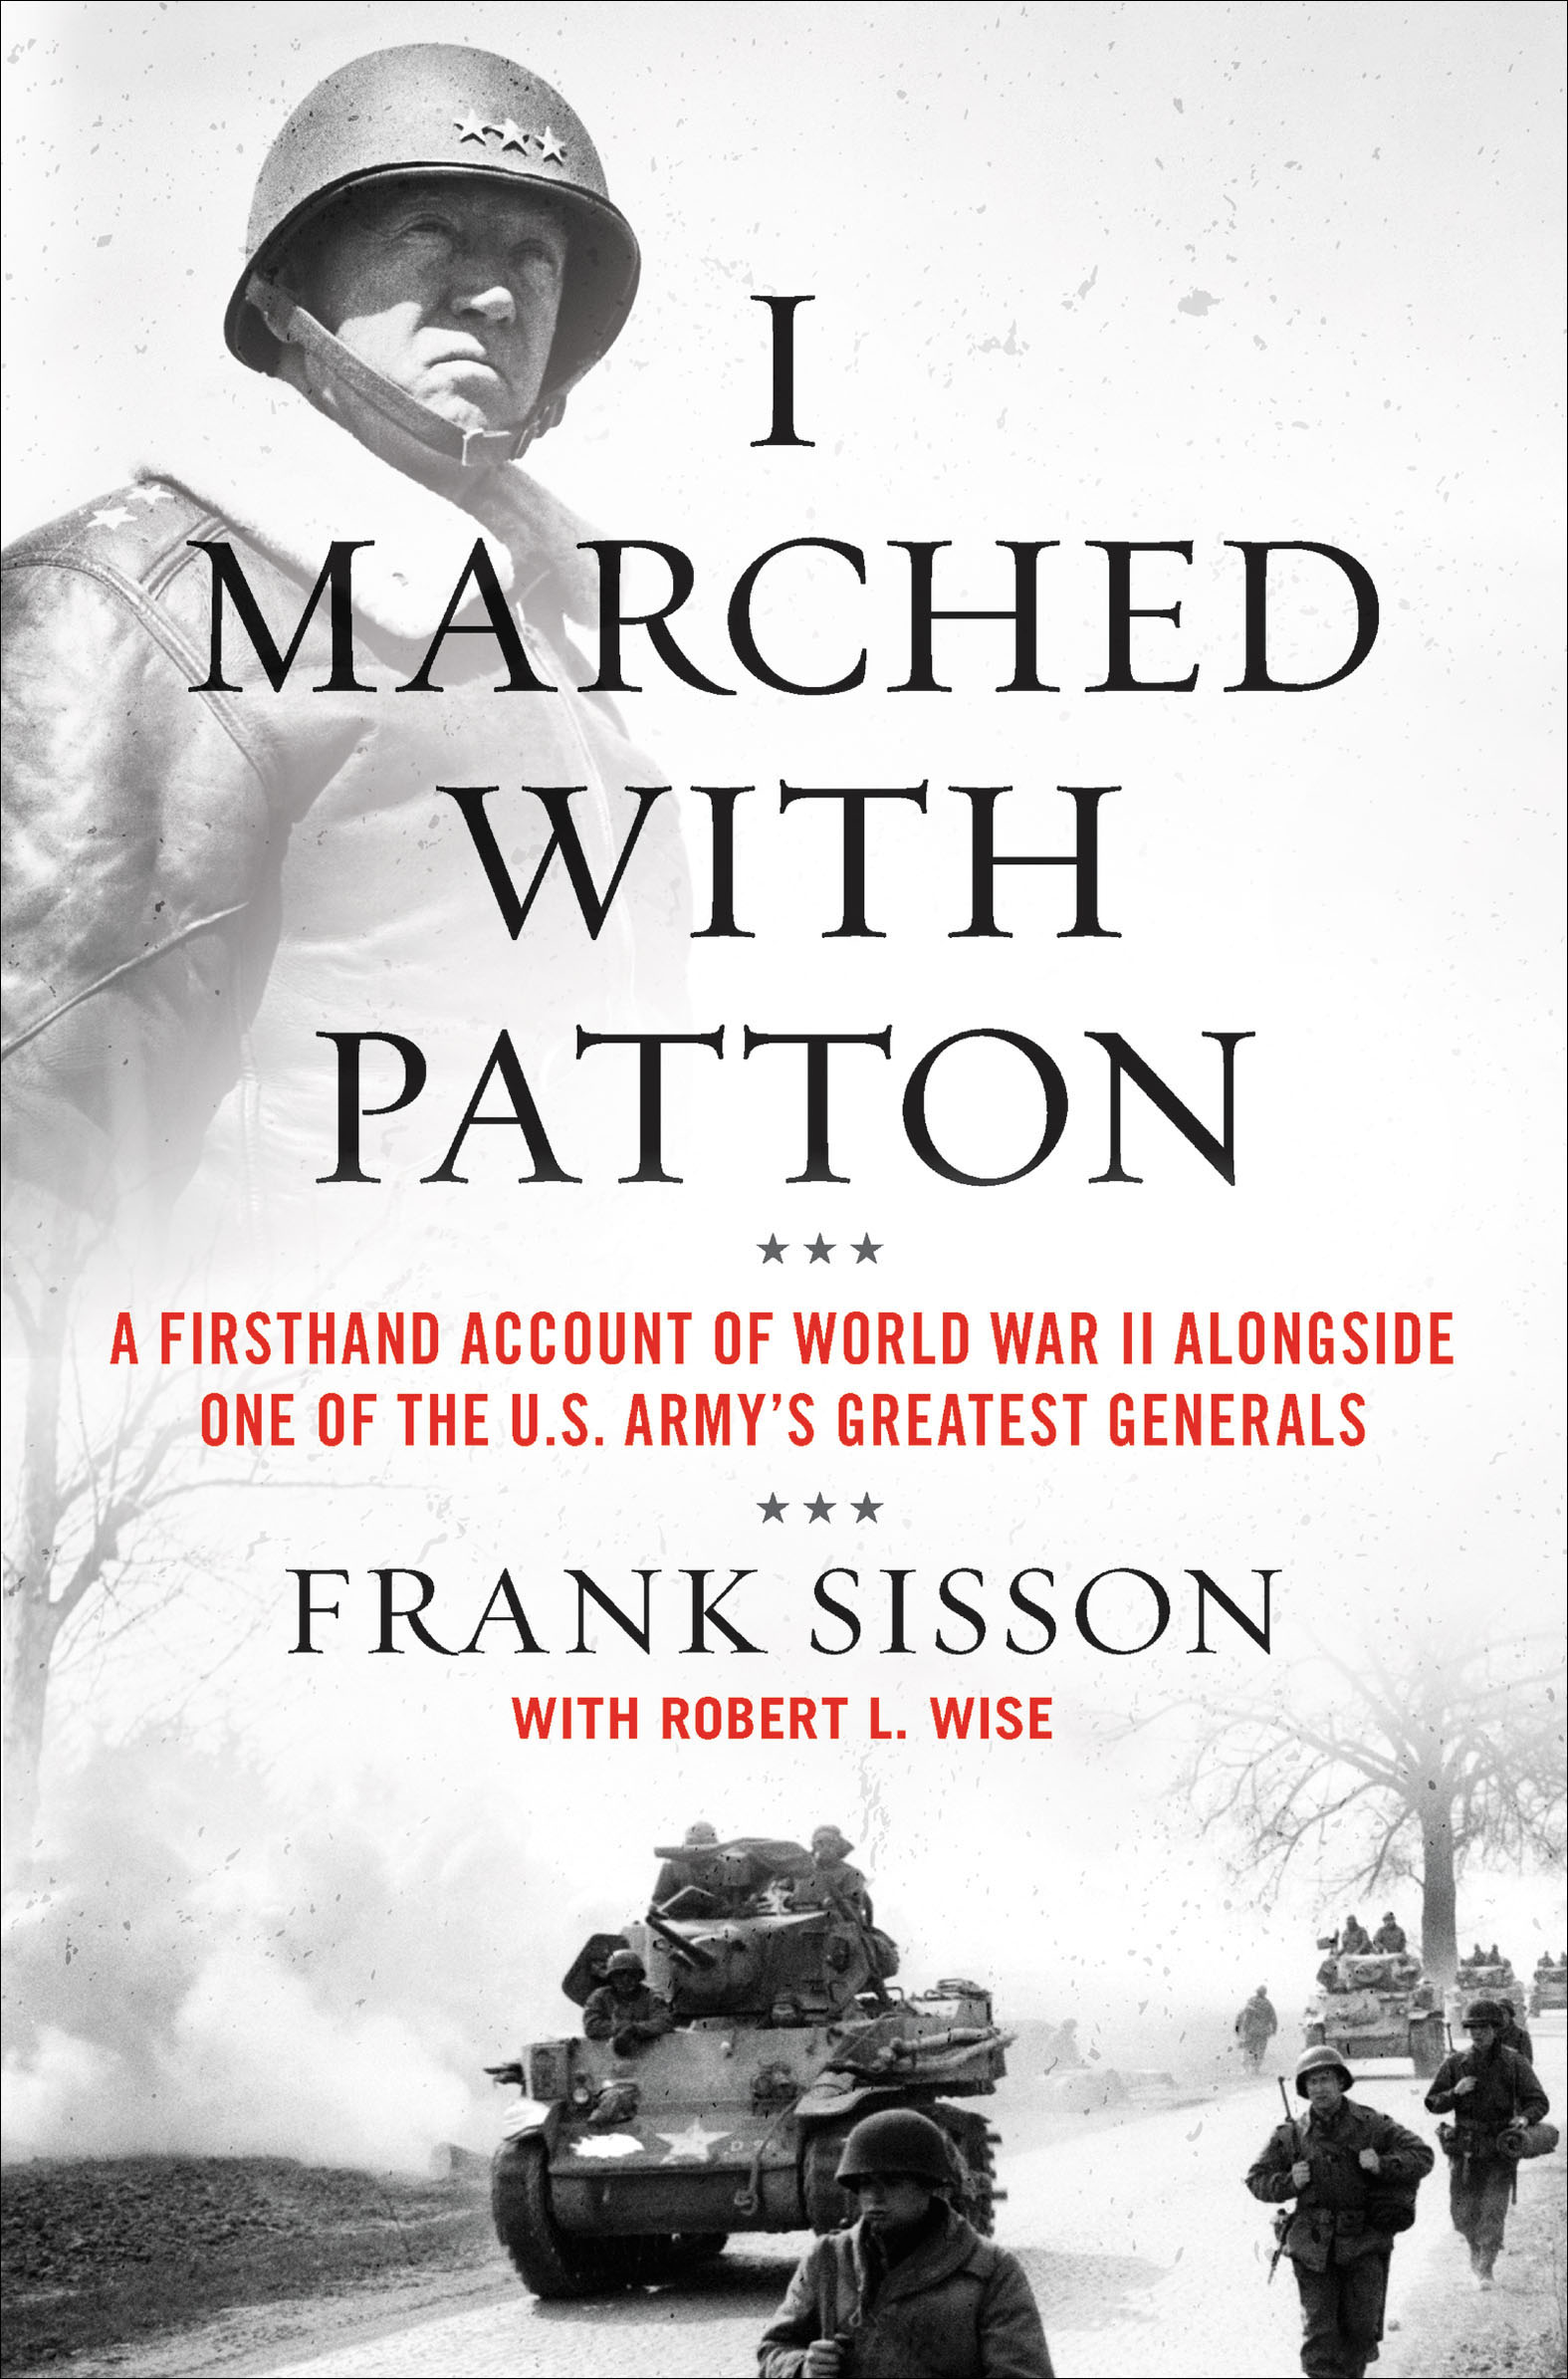 I Marched with Patton A Firsthand Account of World War II Alongside One of the U.S. Army's Greatest Generals cover image